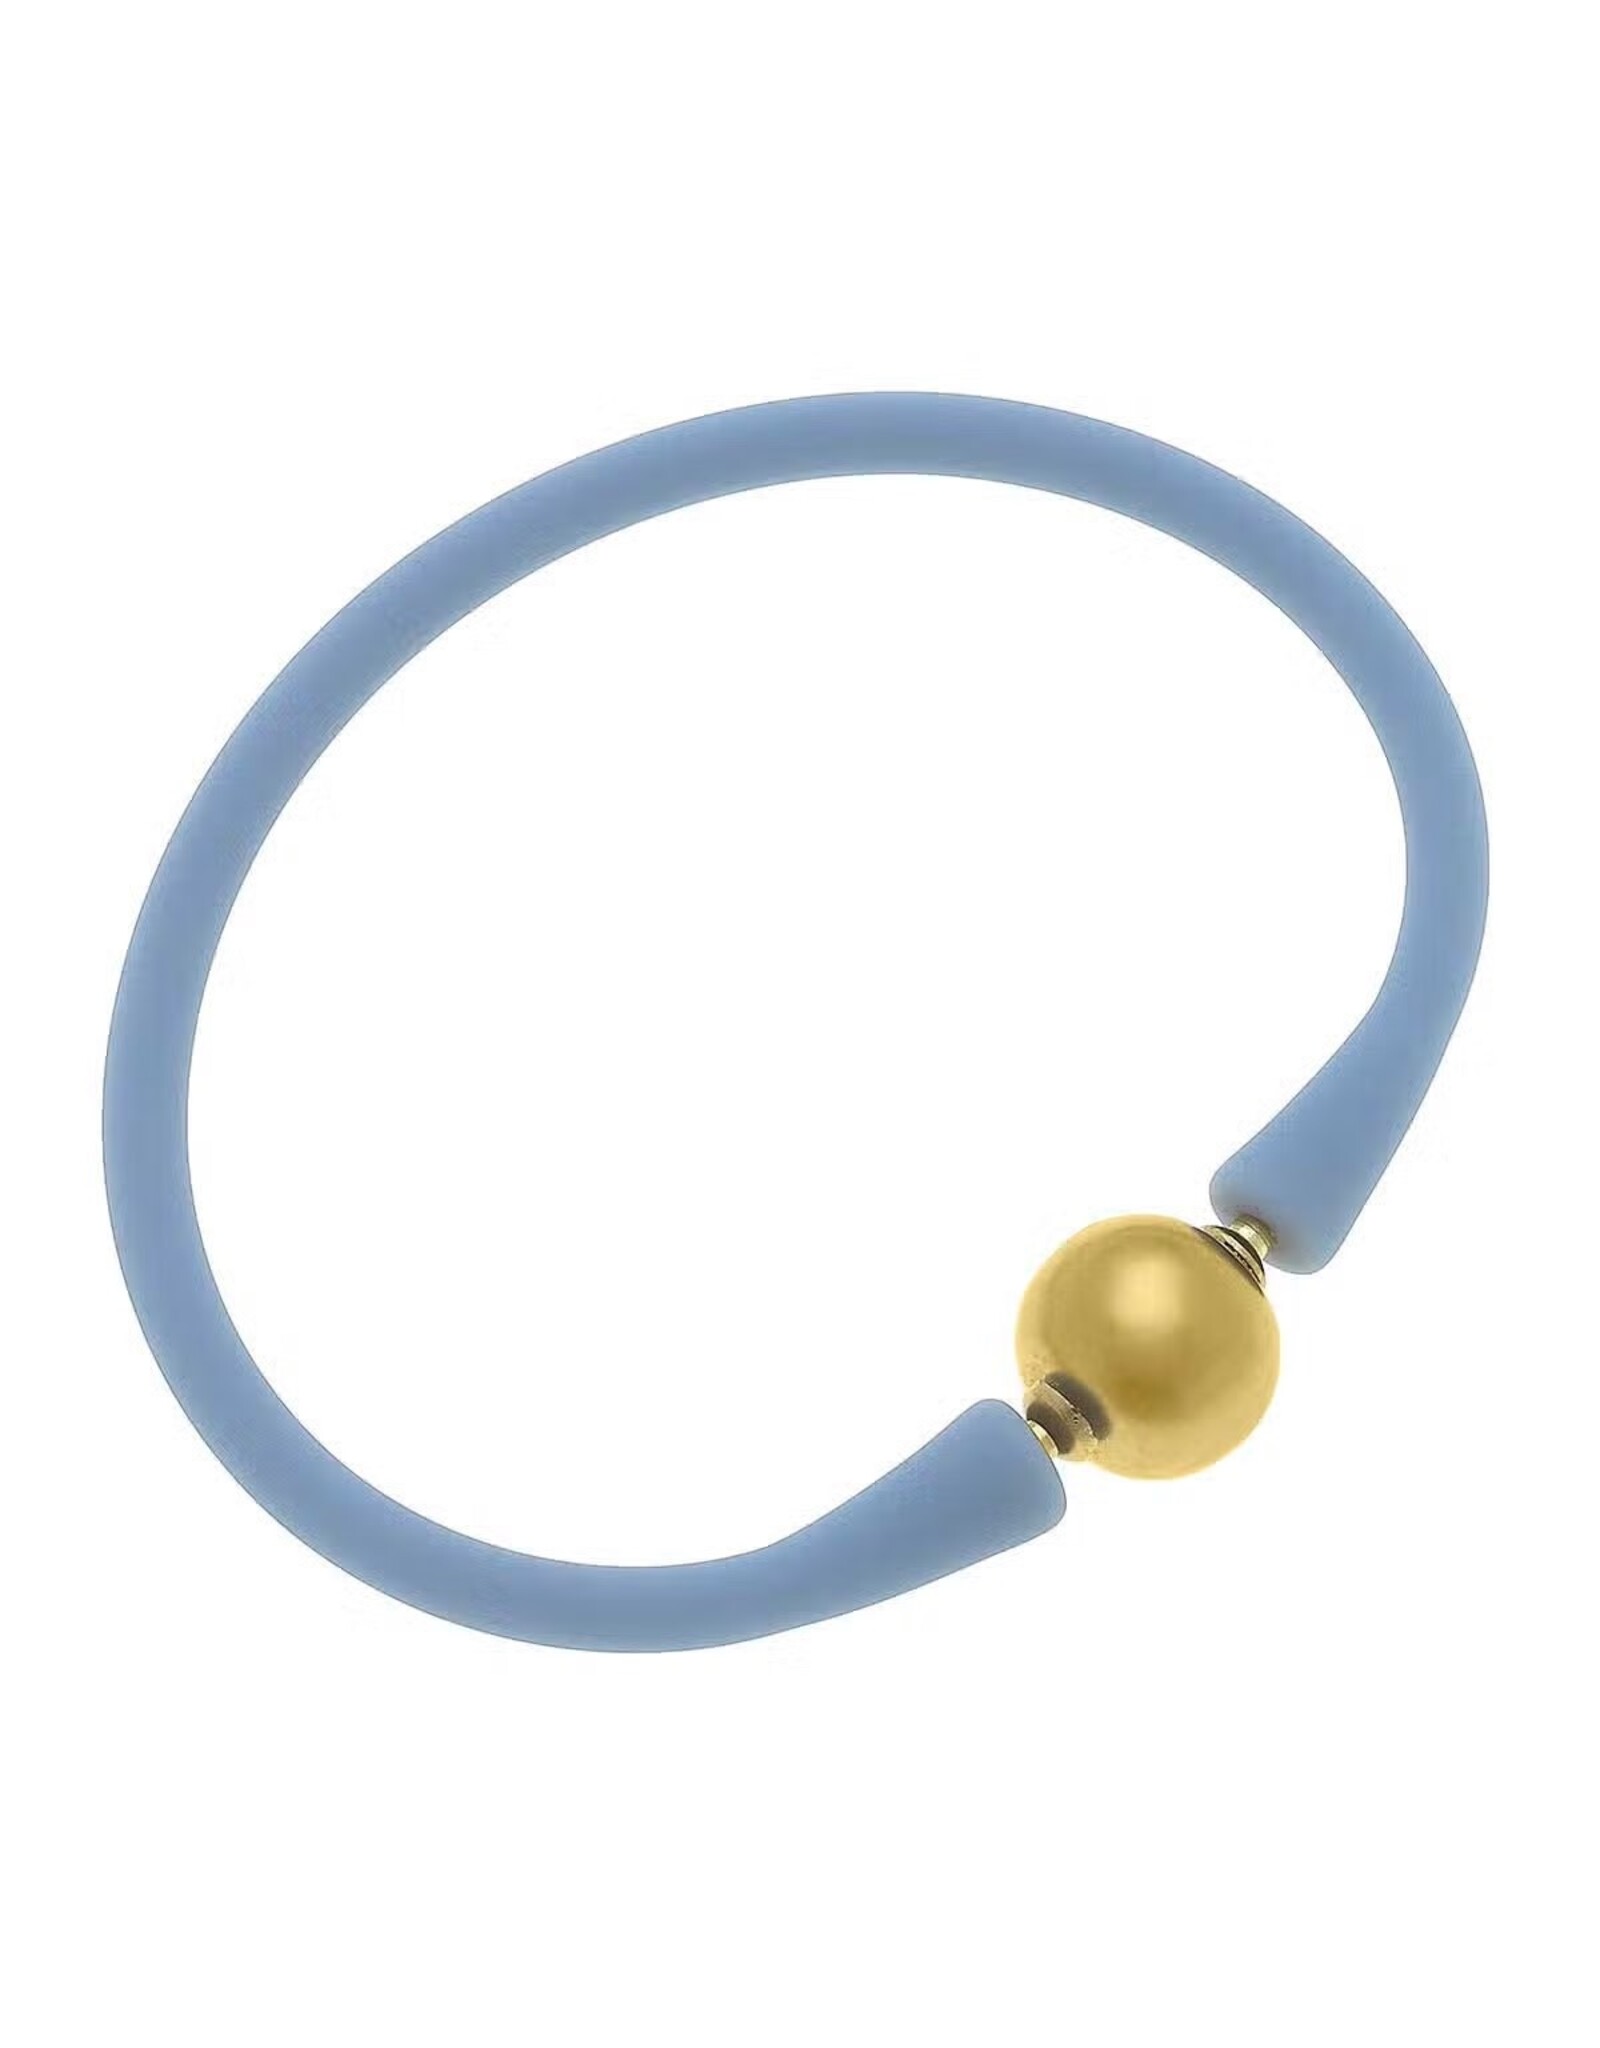 Canvas Style/Faire Bali 24K Gold Plated Ball Bead Silicone Bracelet - Grey